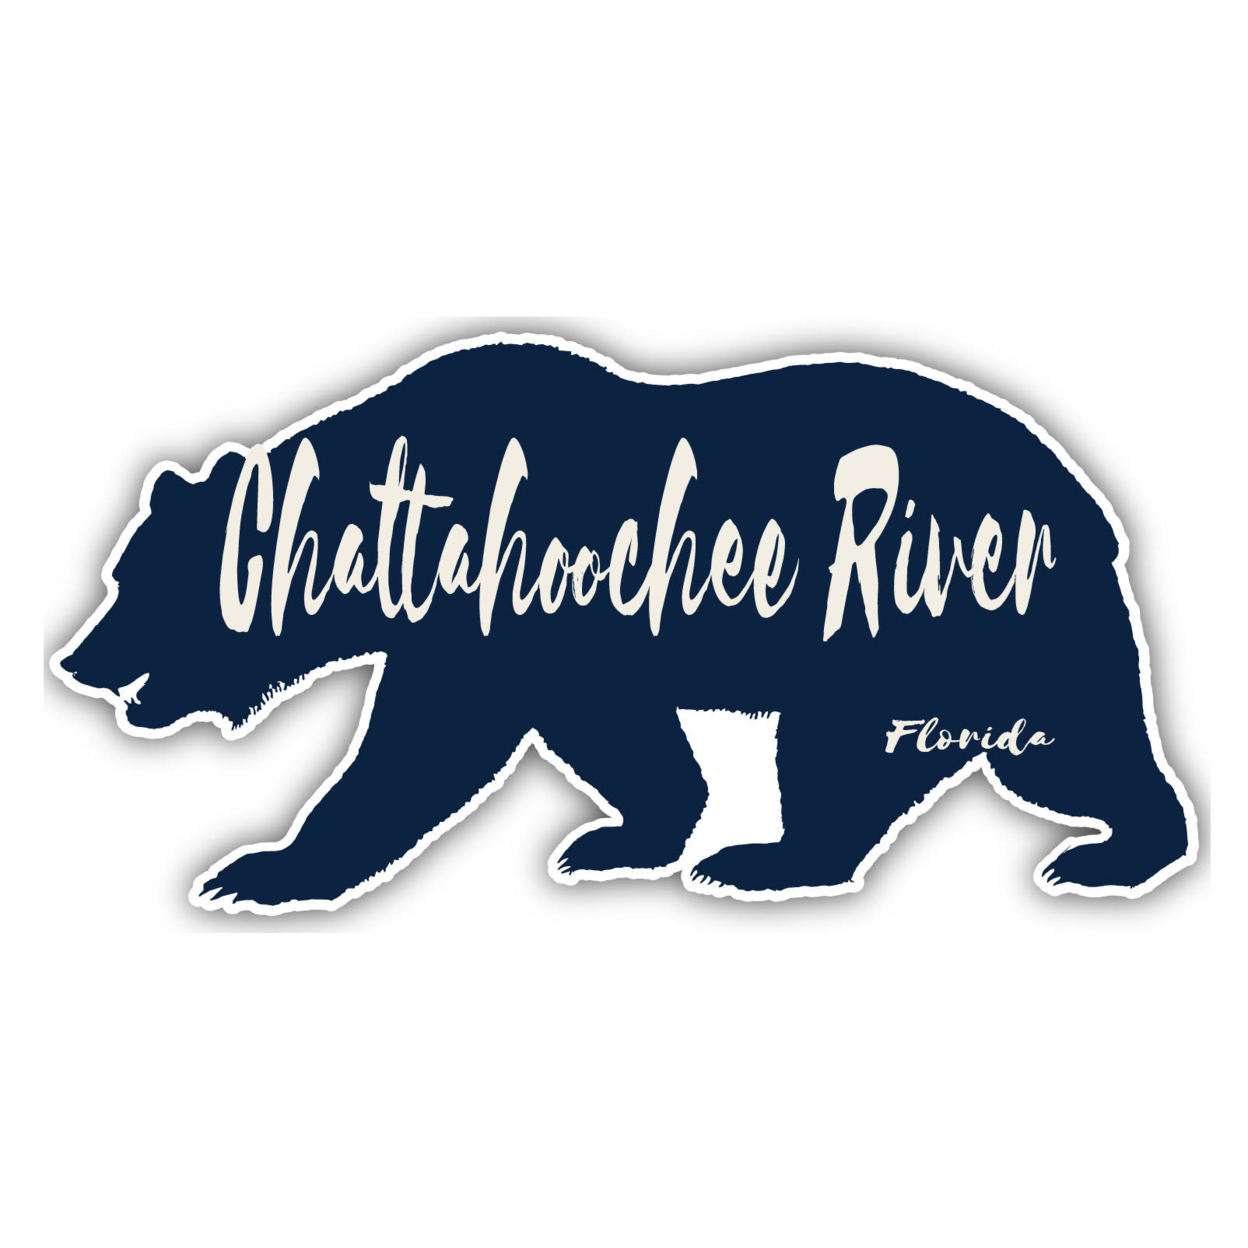 Chattahoochee River Florida Souvenir Decorative Stickers (Choose Theme And Size) - 4-Pack, 10-Inch, Bear